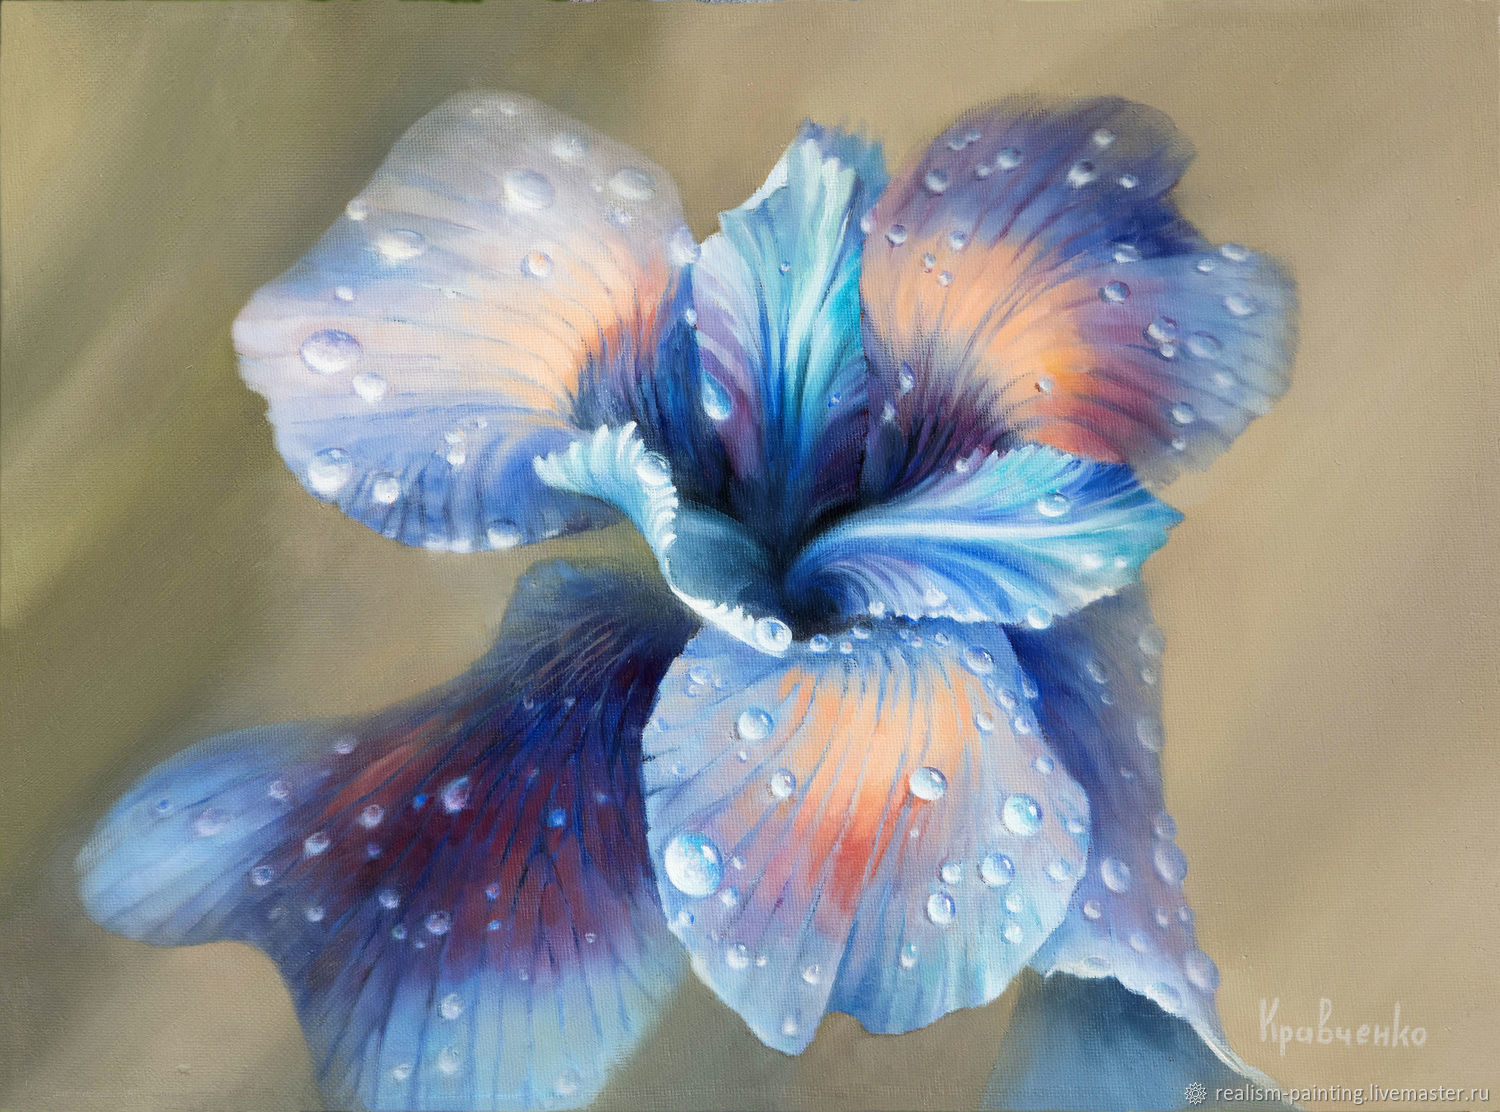 Oil painting on canvas "Iris flower after rain", Pictures, St. Petersburg,  Фото №1